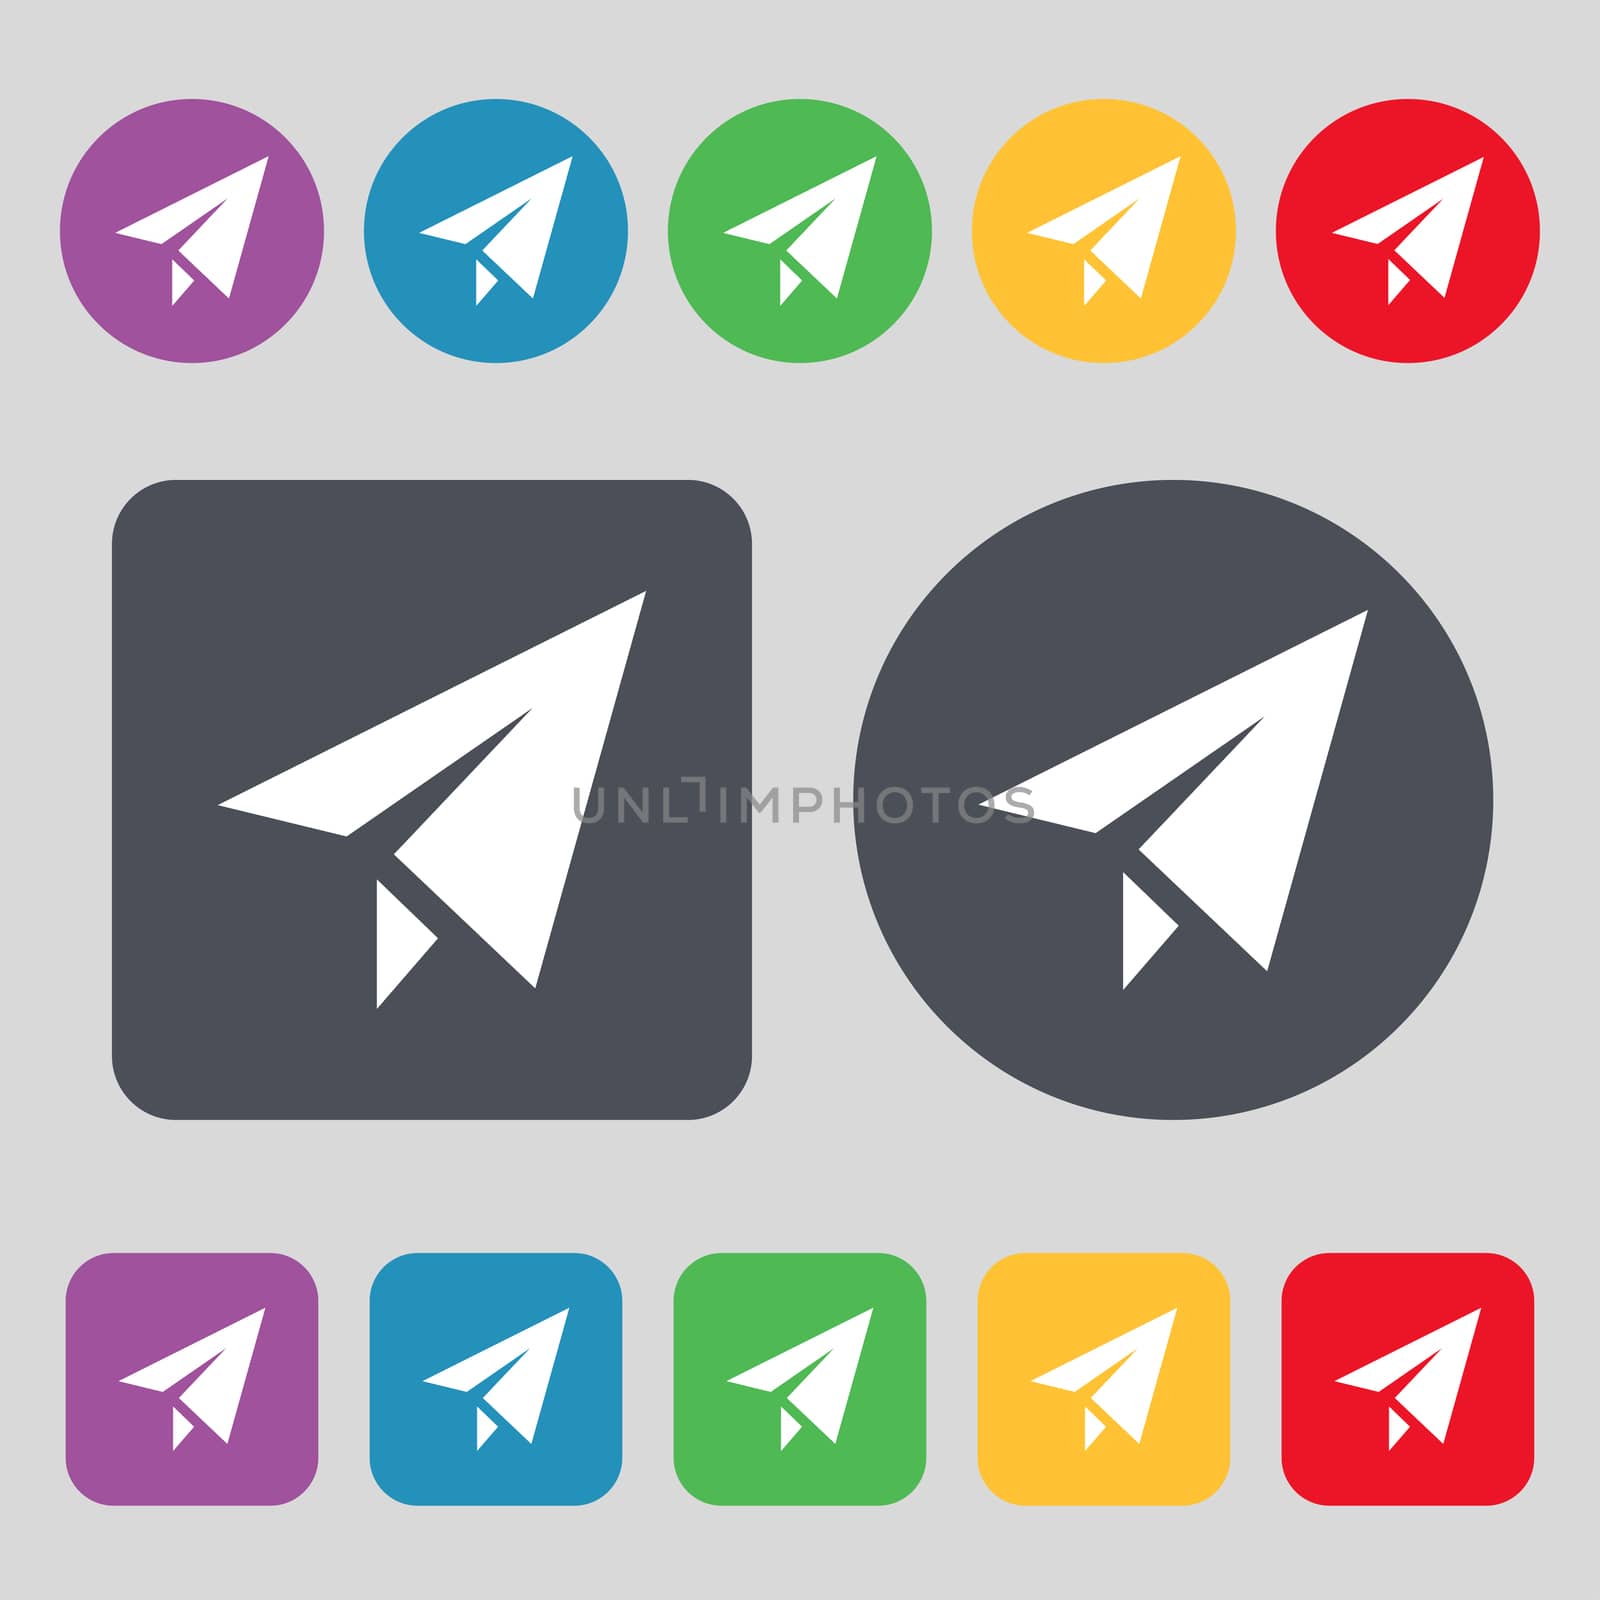 Paper airplane icon sign. A set of 12 colored buttons. Flat design. illustration